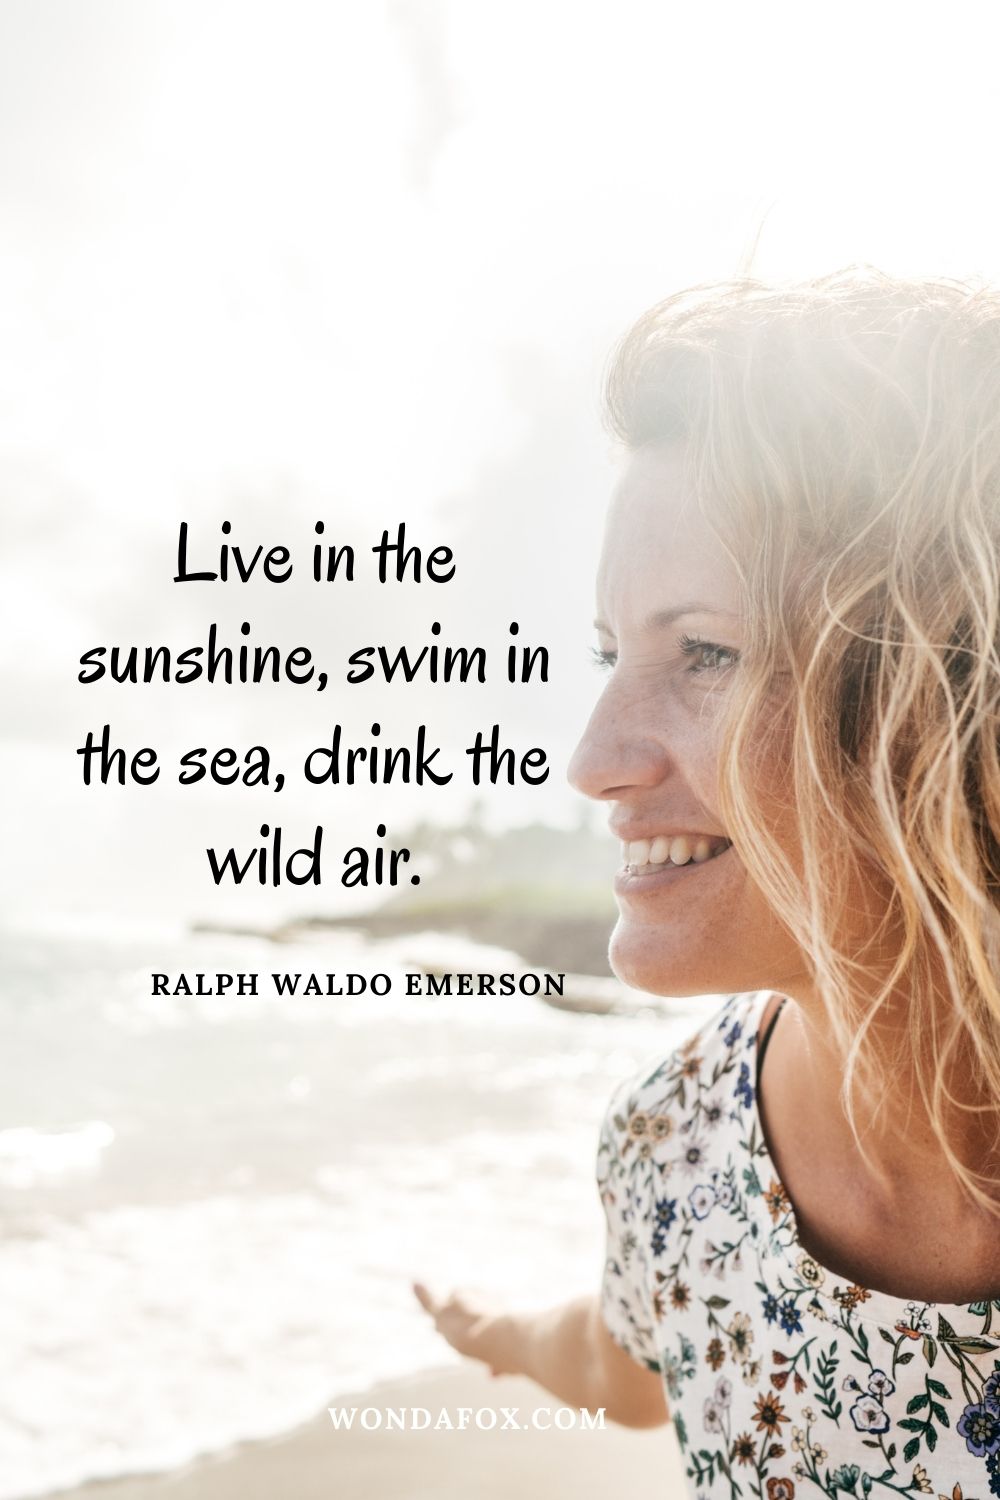 Live in the sunshine, swim in the sea, drink the wild air.